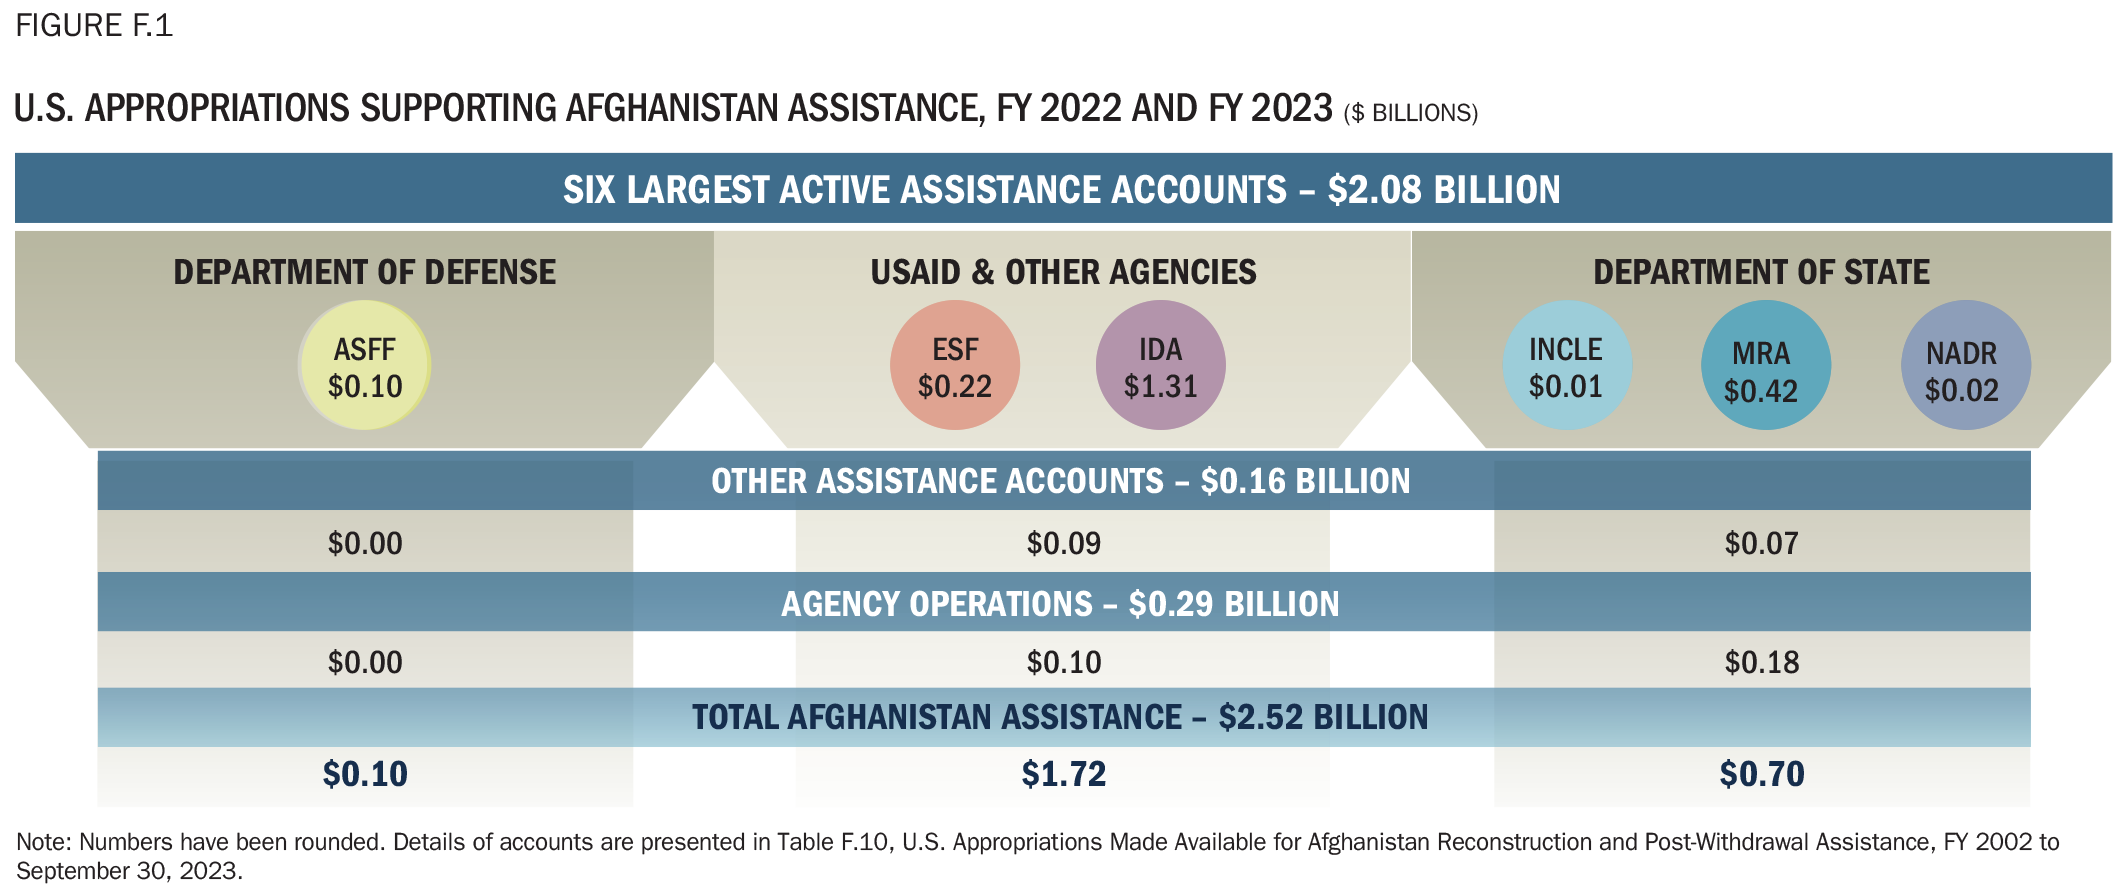 Figure F.1 U.S. Appropriations Supporting Afghanistan Assistance, FY 2022 and FY 2023 ($ Billions)